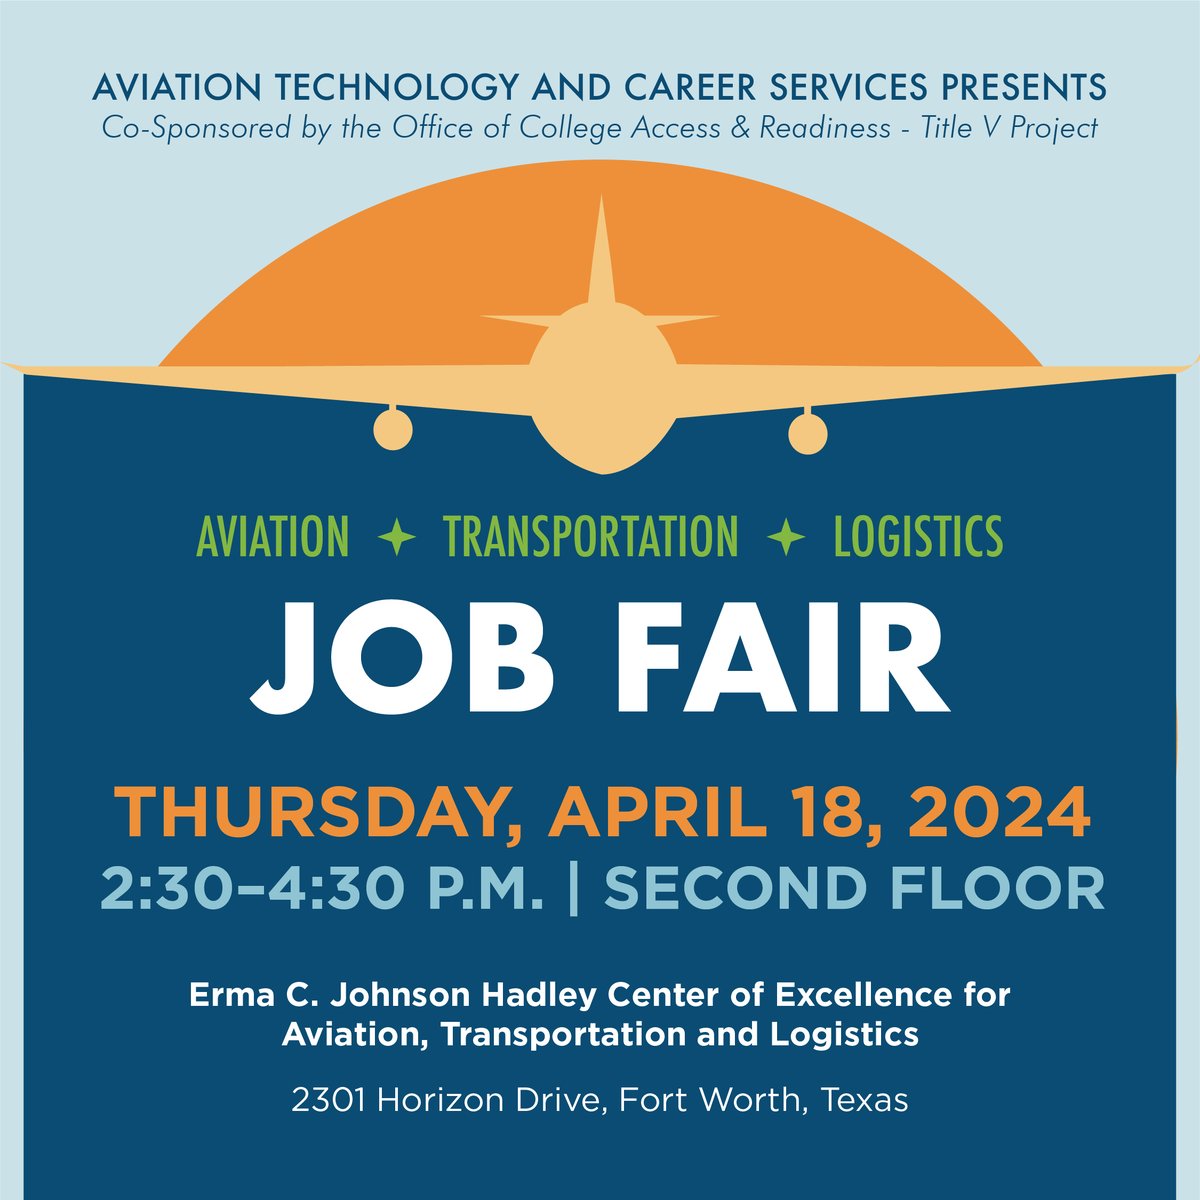 Remember to join us tomorrow at our Aviation, Transportation, and Logistics Job Fair at the Erma C. Johnson Hadley Center for Excellence in Aviation, Transportation, and Logistics. Learn more: bit.ly/49JOvDz